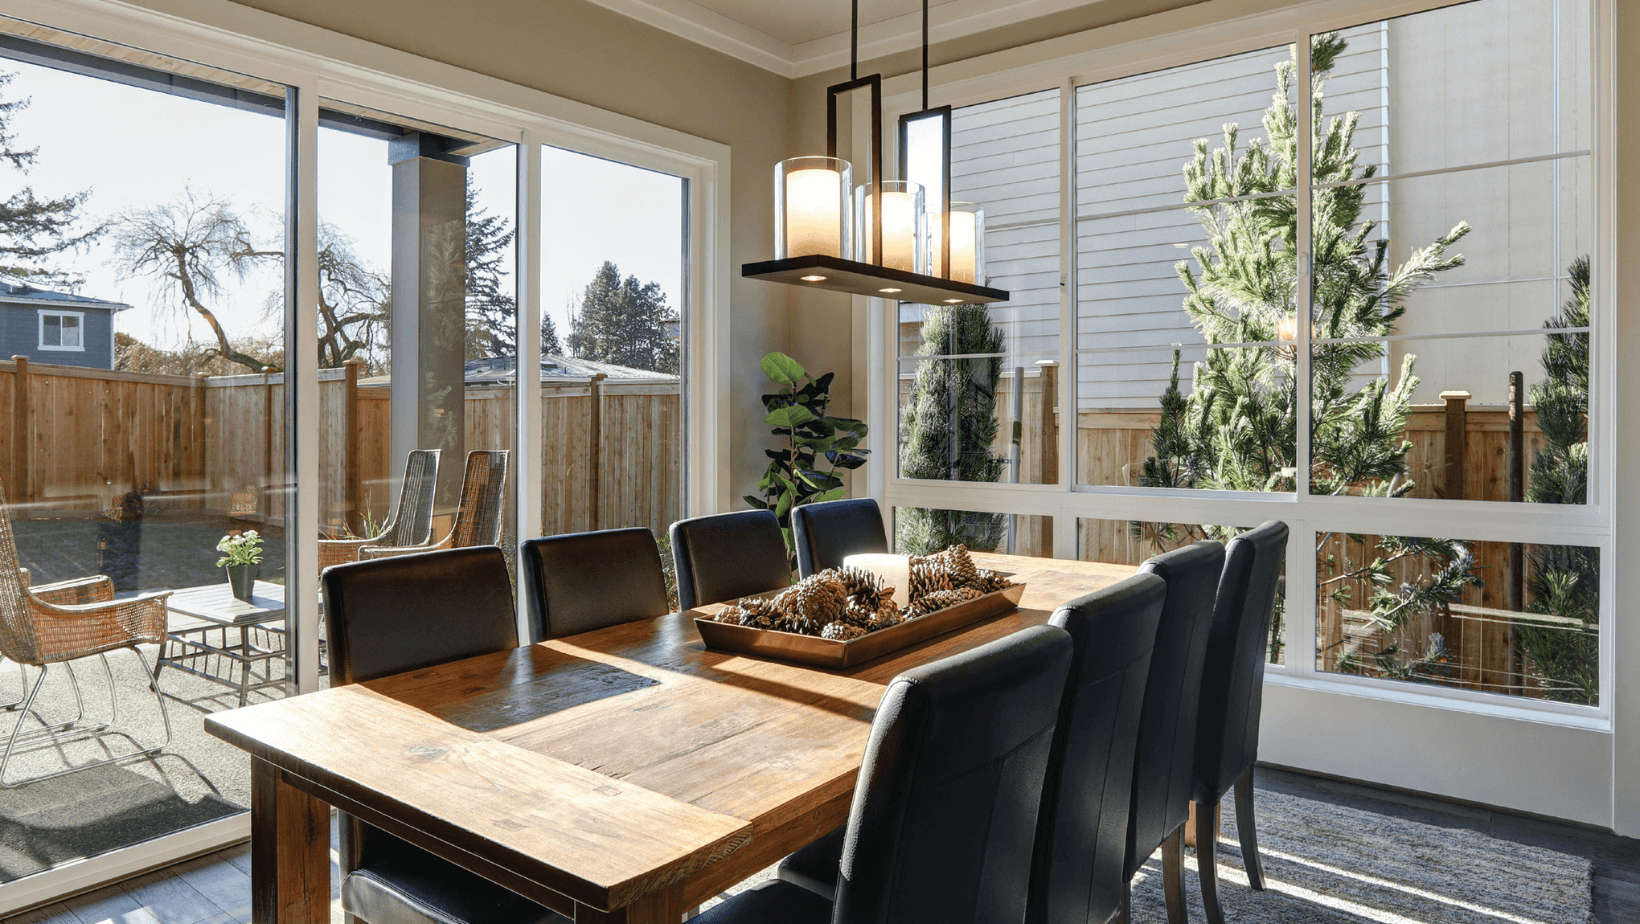 Embracing Natural Light: 8 Ways to Brighten Up Your Home with Windows And Doors